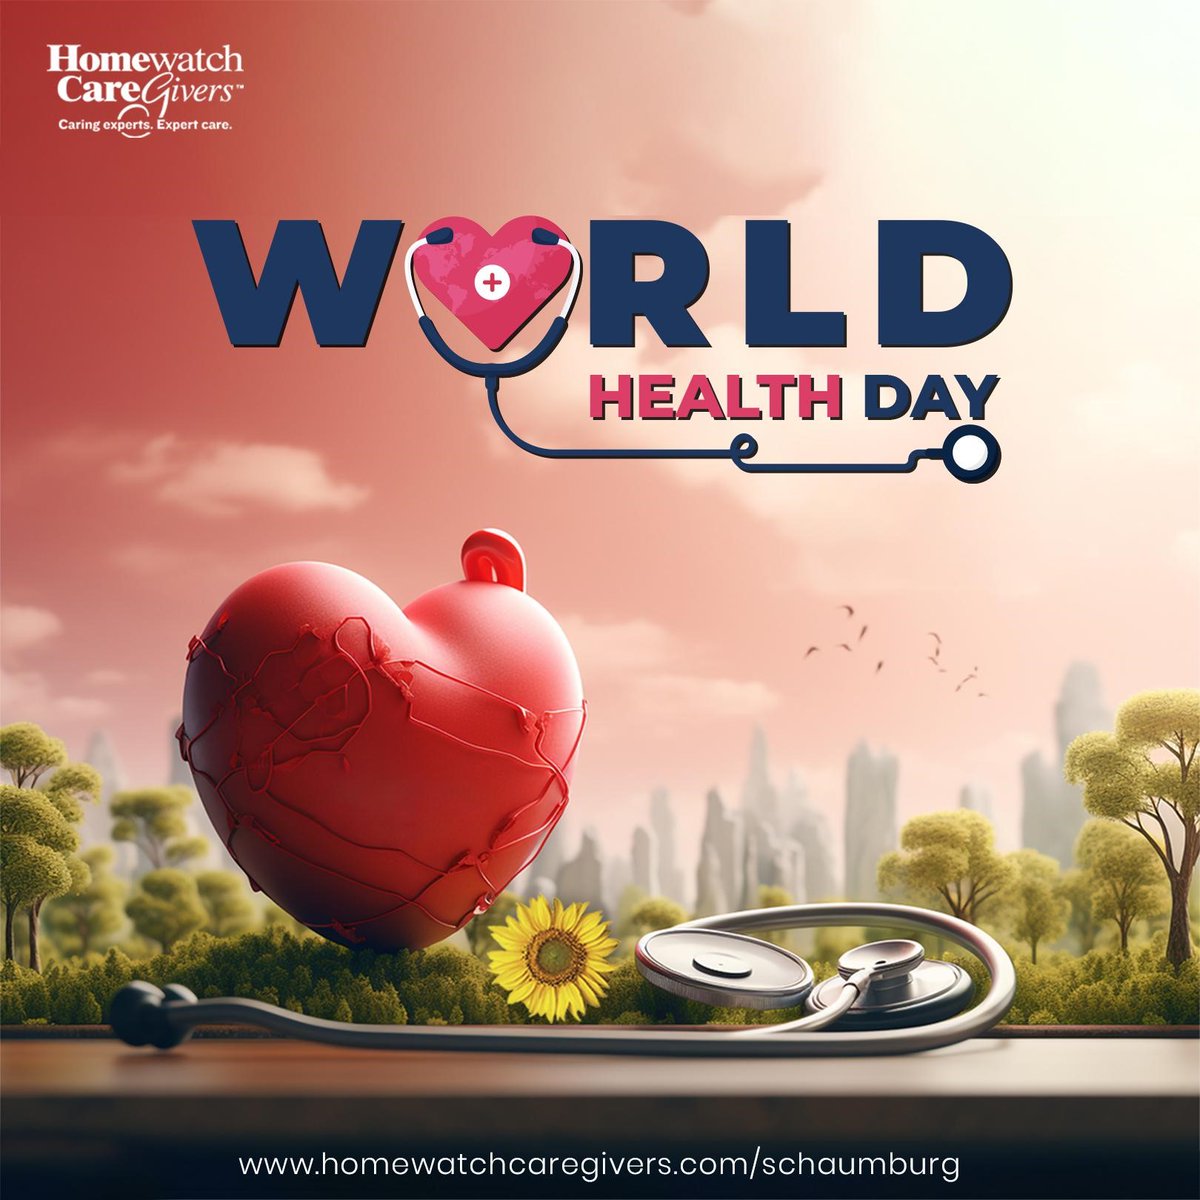 #RespectingChoices, #Empowering #Wellbeing

At #HomeWatch #CareGivers, we believe informed decisions lead to better #health outcomes. This #WorldHealthDay, we stand by your right to:
●#Qualitycare with dignity and respect for your choices.
#healthoutcomes #WorldHealthDay